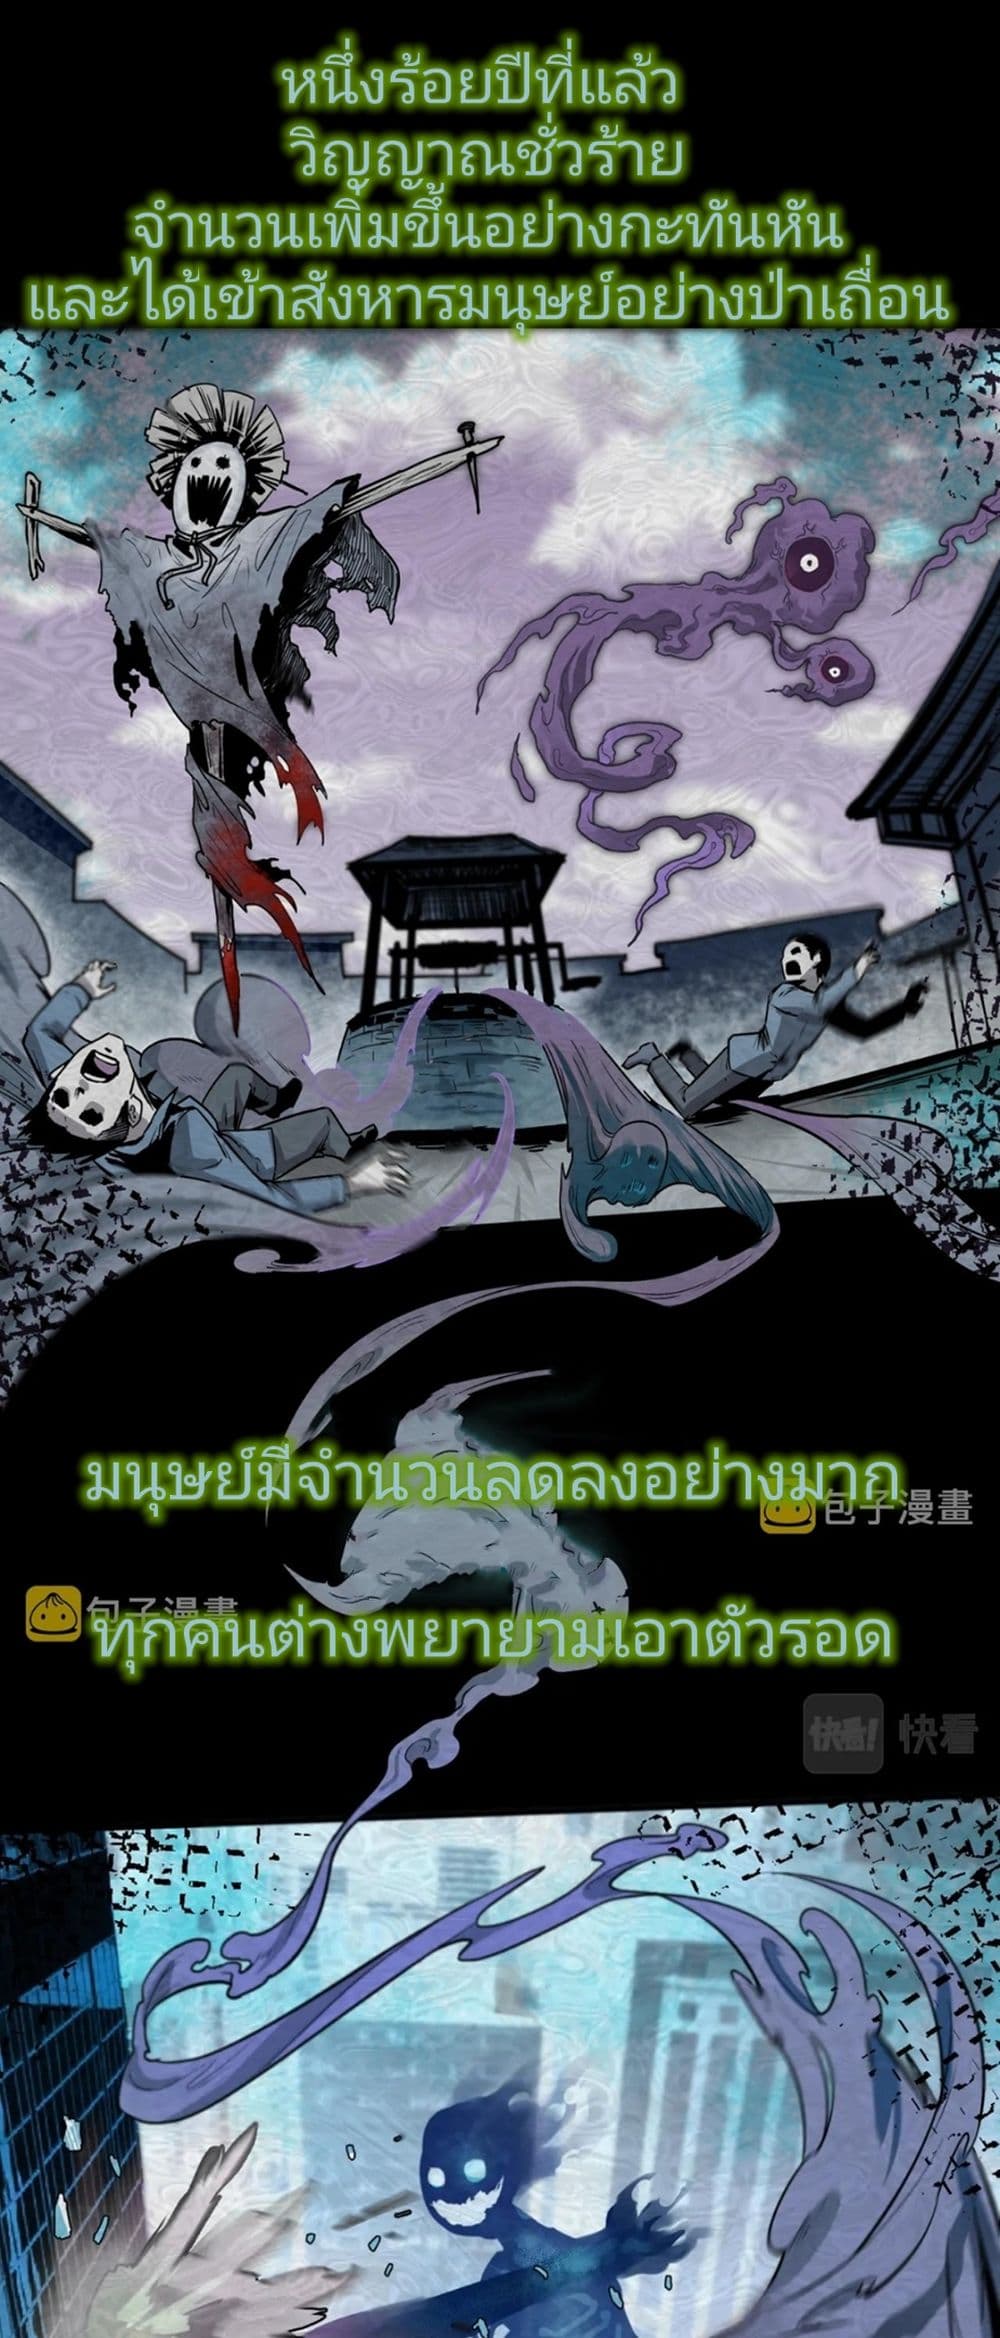 The Age of Ghost Spirits 1-1